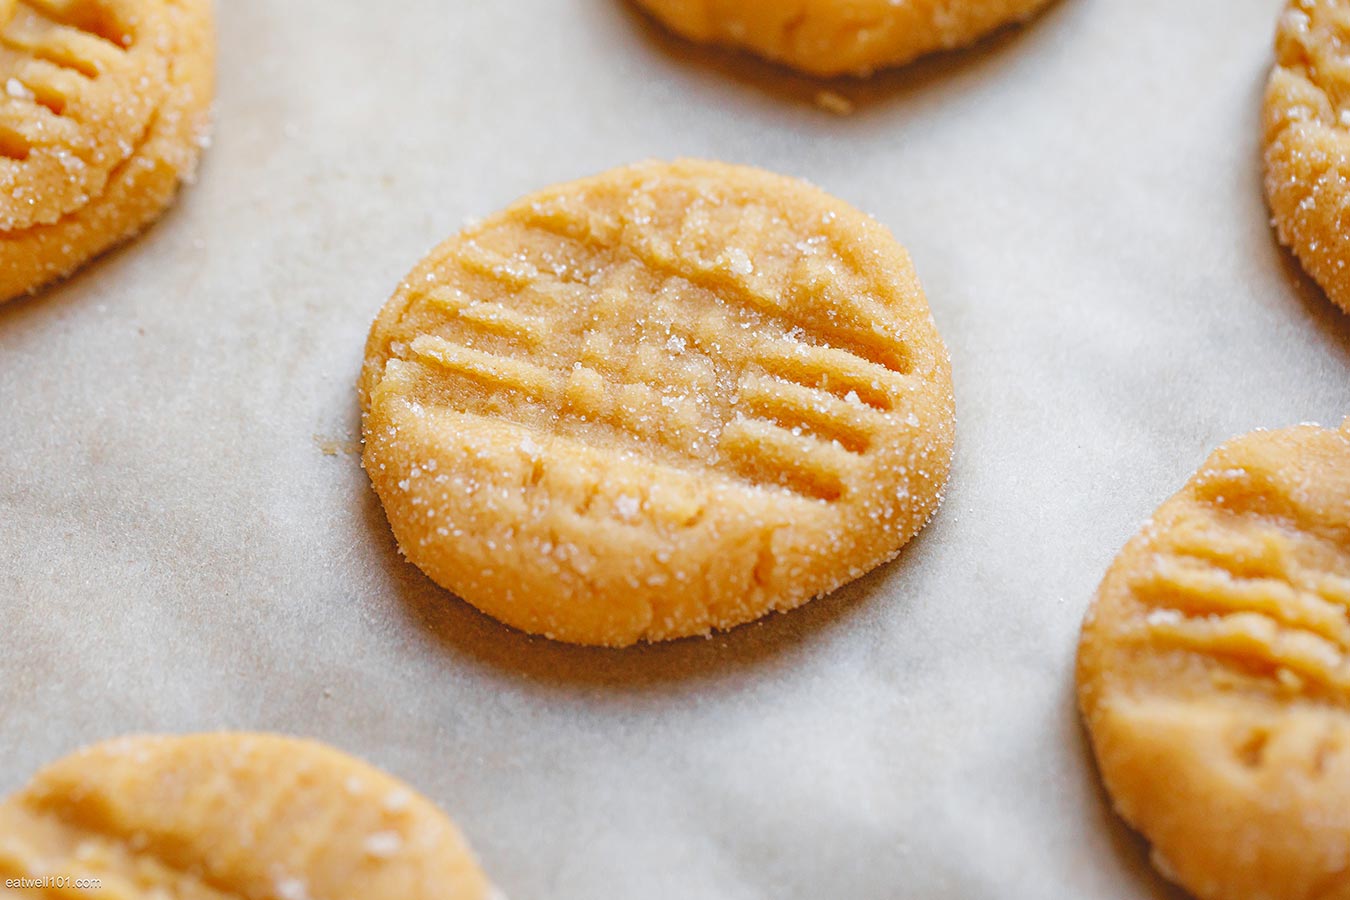 Cream Cheese and Peanut Butter Cookies recipe